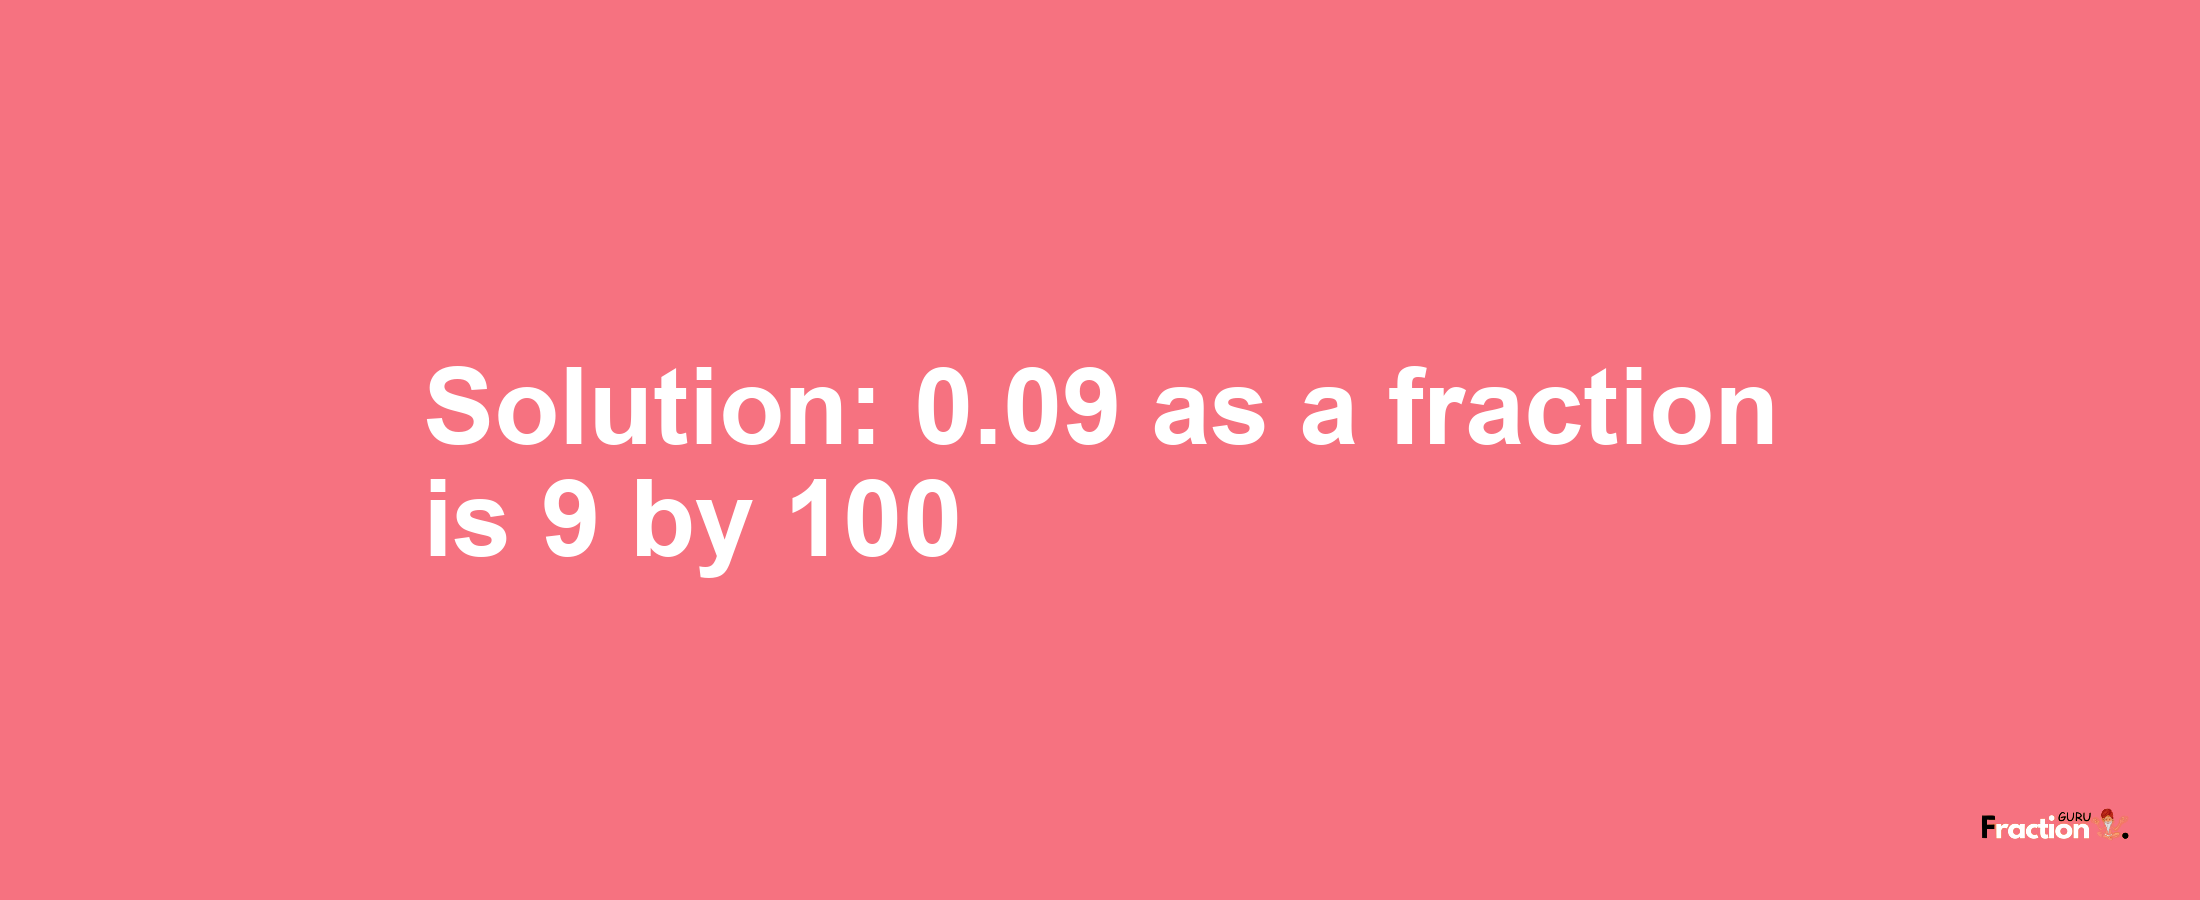 Solution:0.09 as a fraction is 9/100